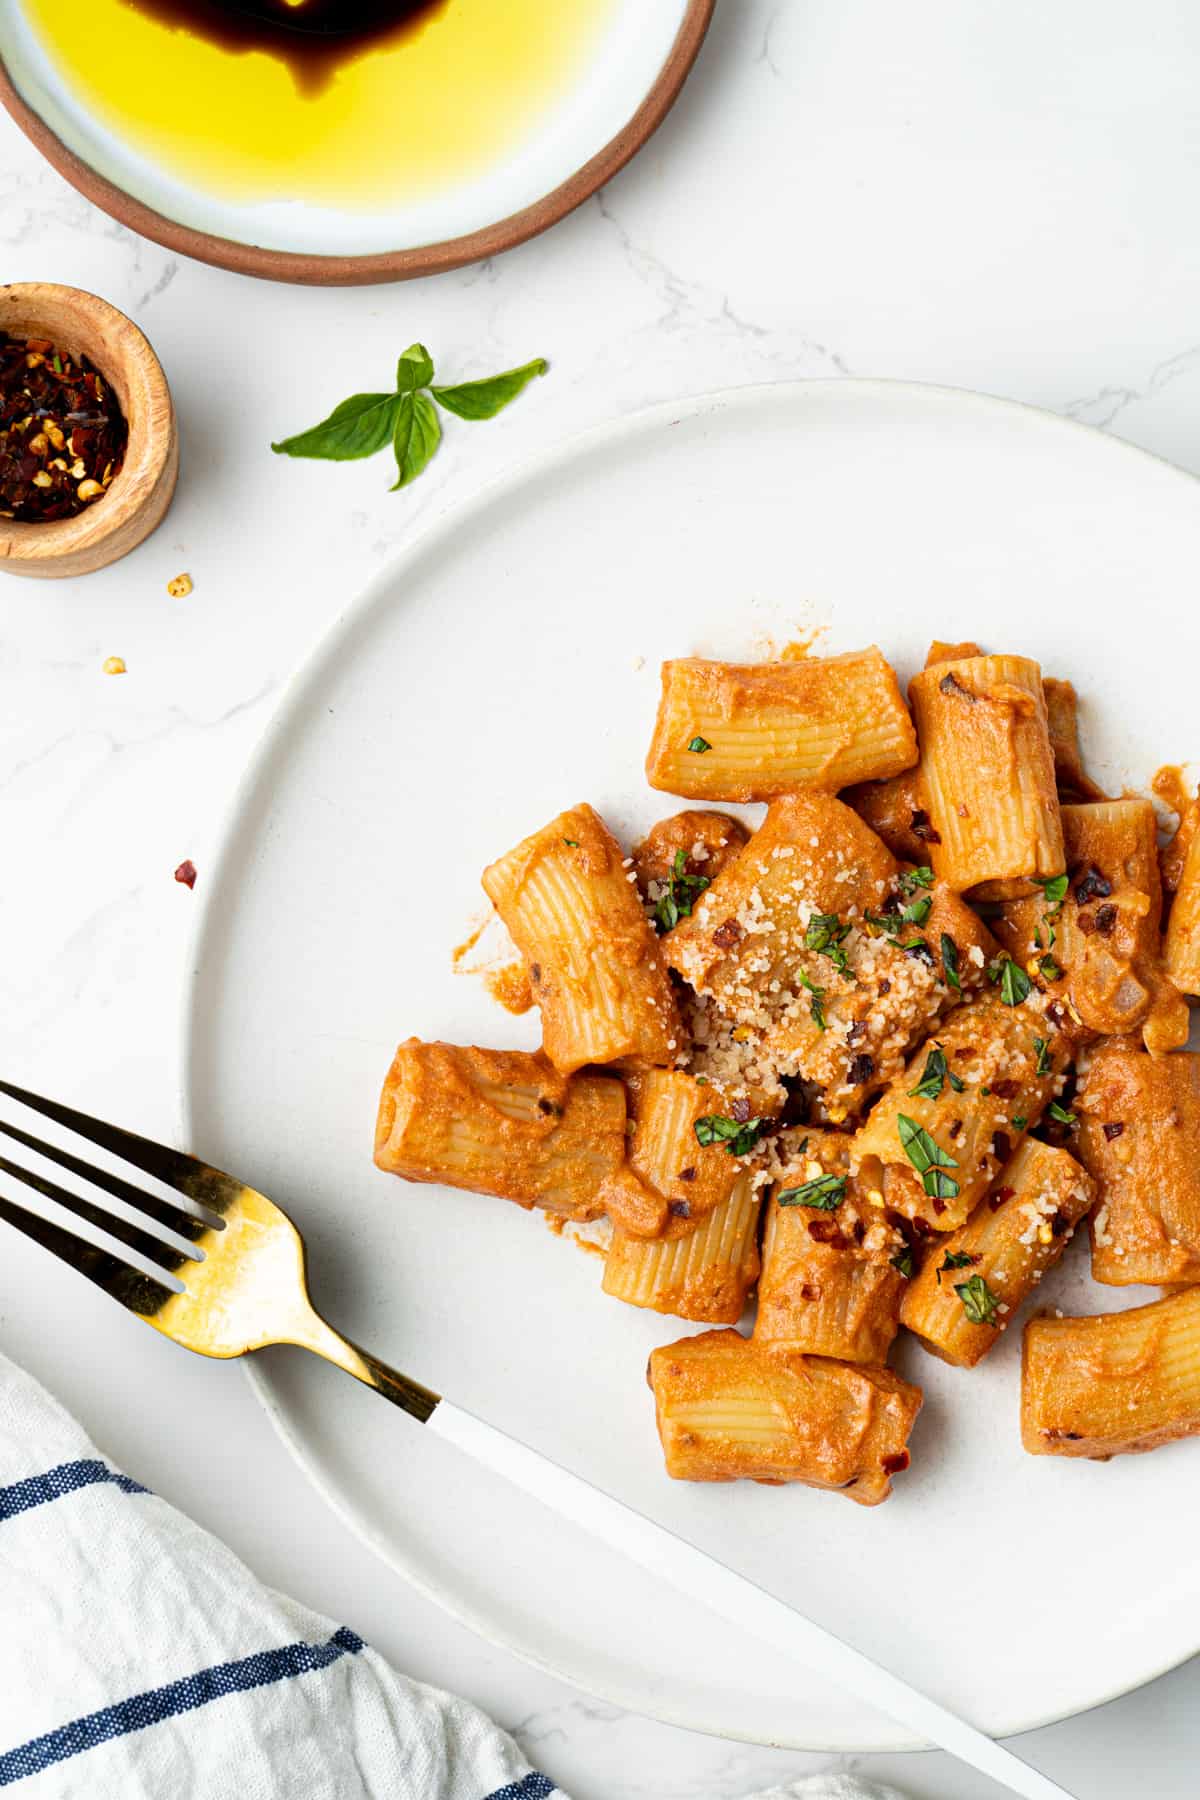 Spicy rigatoni with red pepper flakes and olive oil plate on the side.